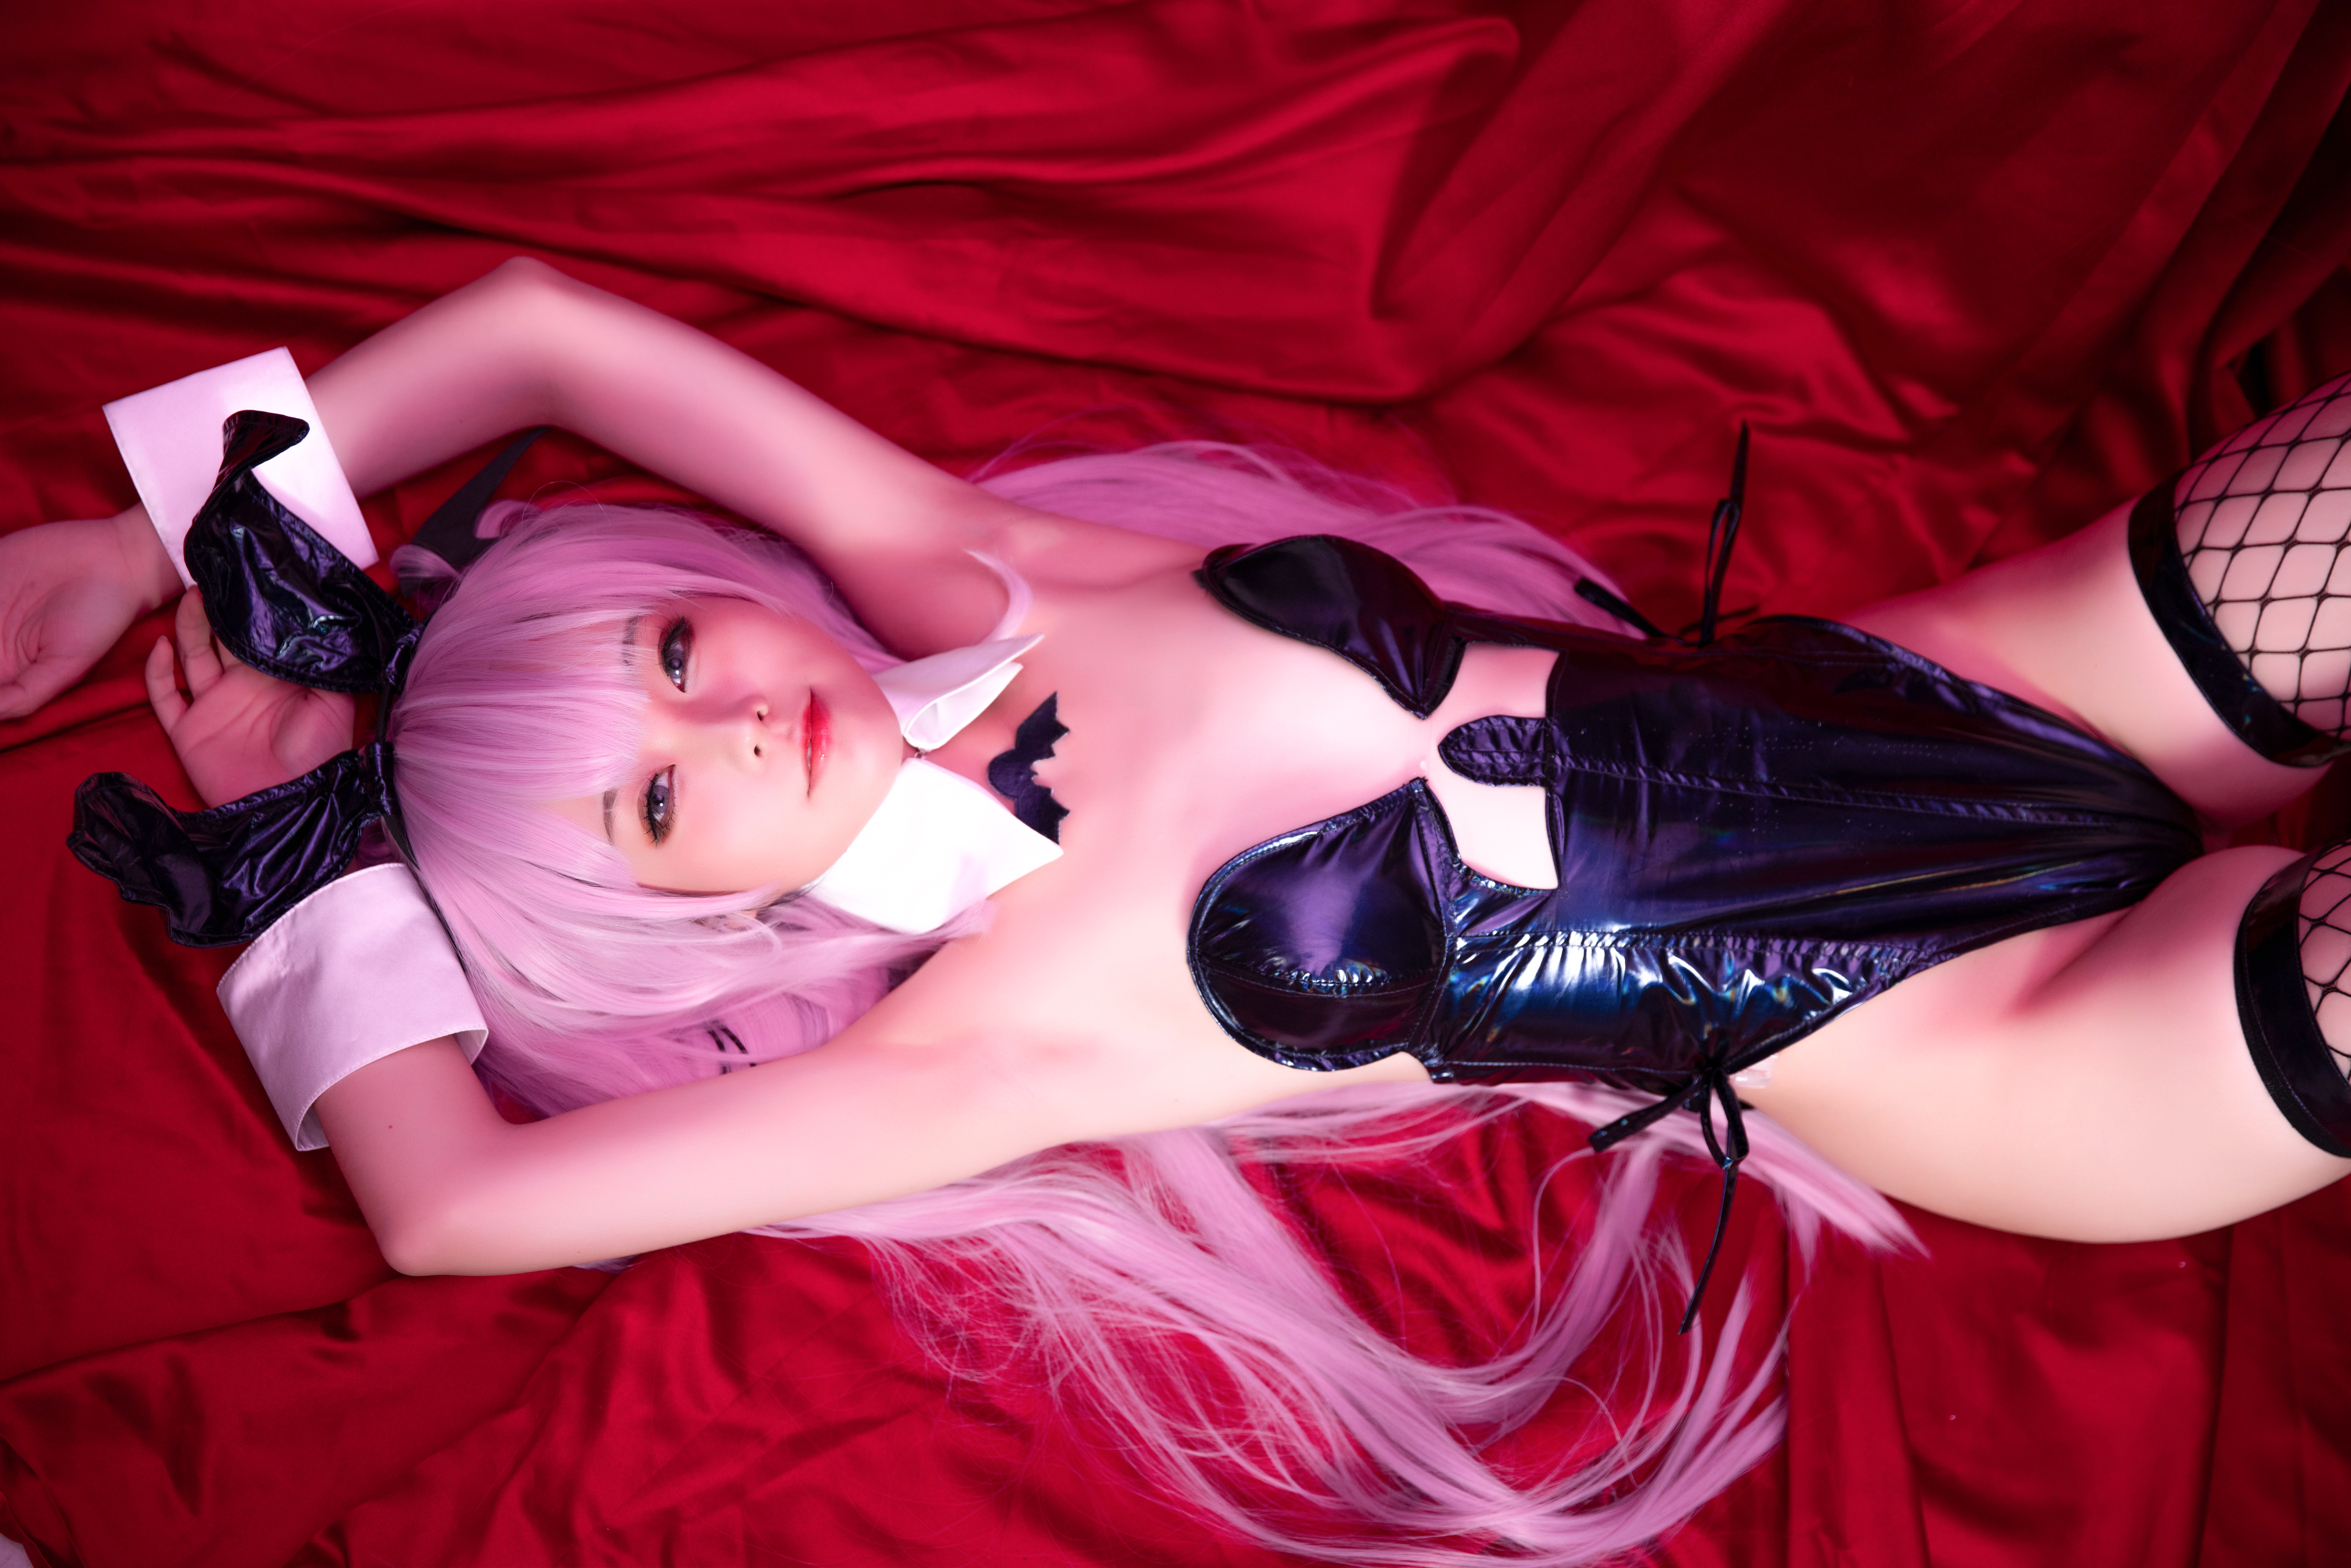 People 8174x5452 G44 (Model) pink hair bunny ears fishnet stockings pink lipstick Asian